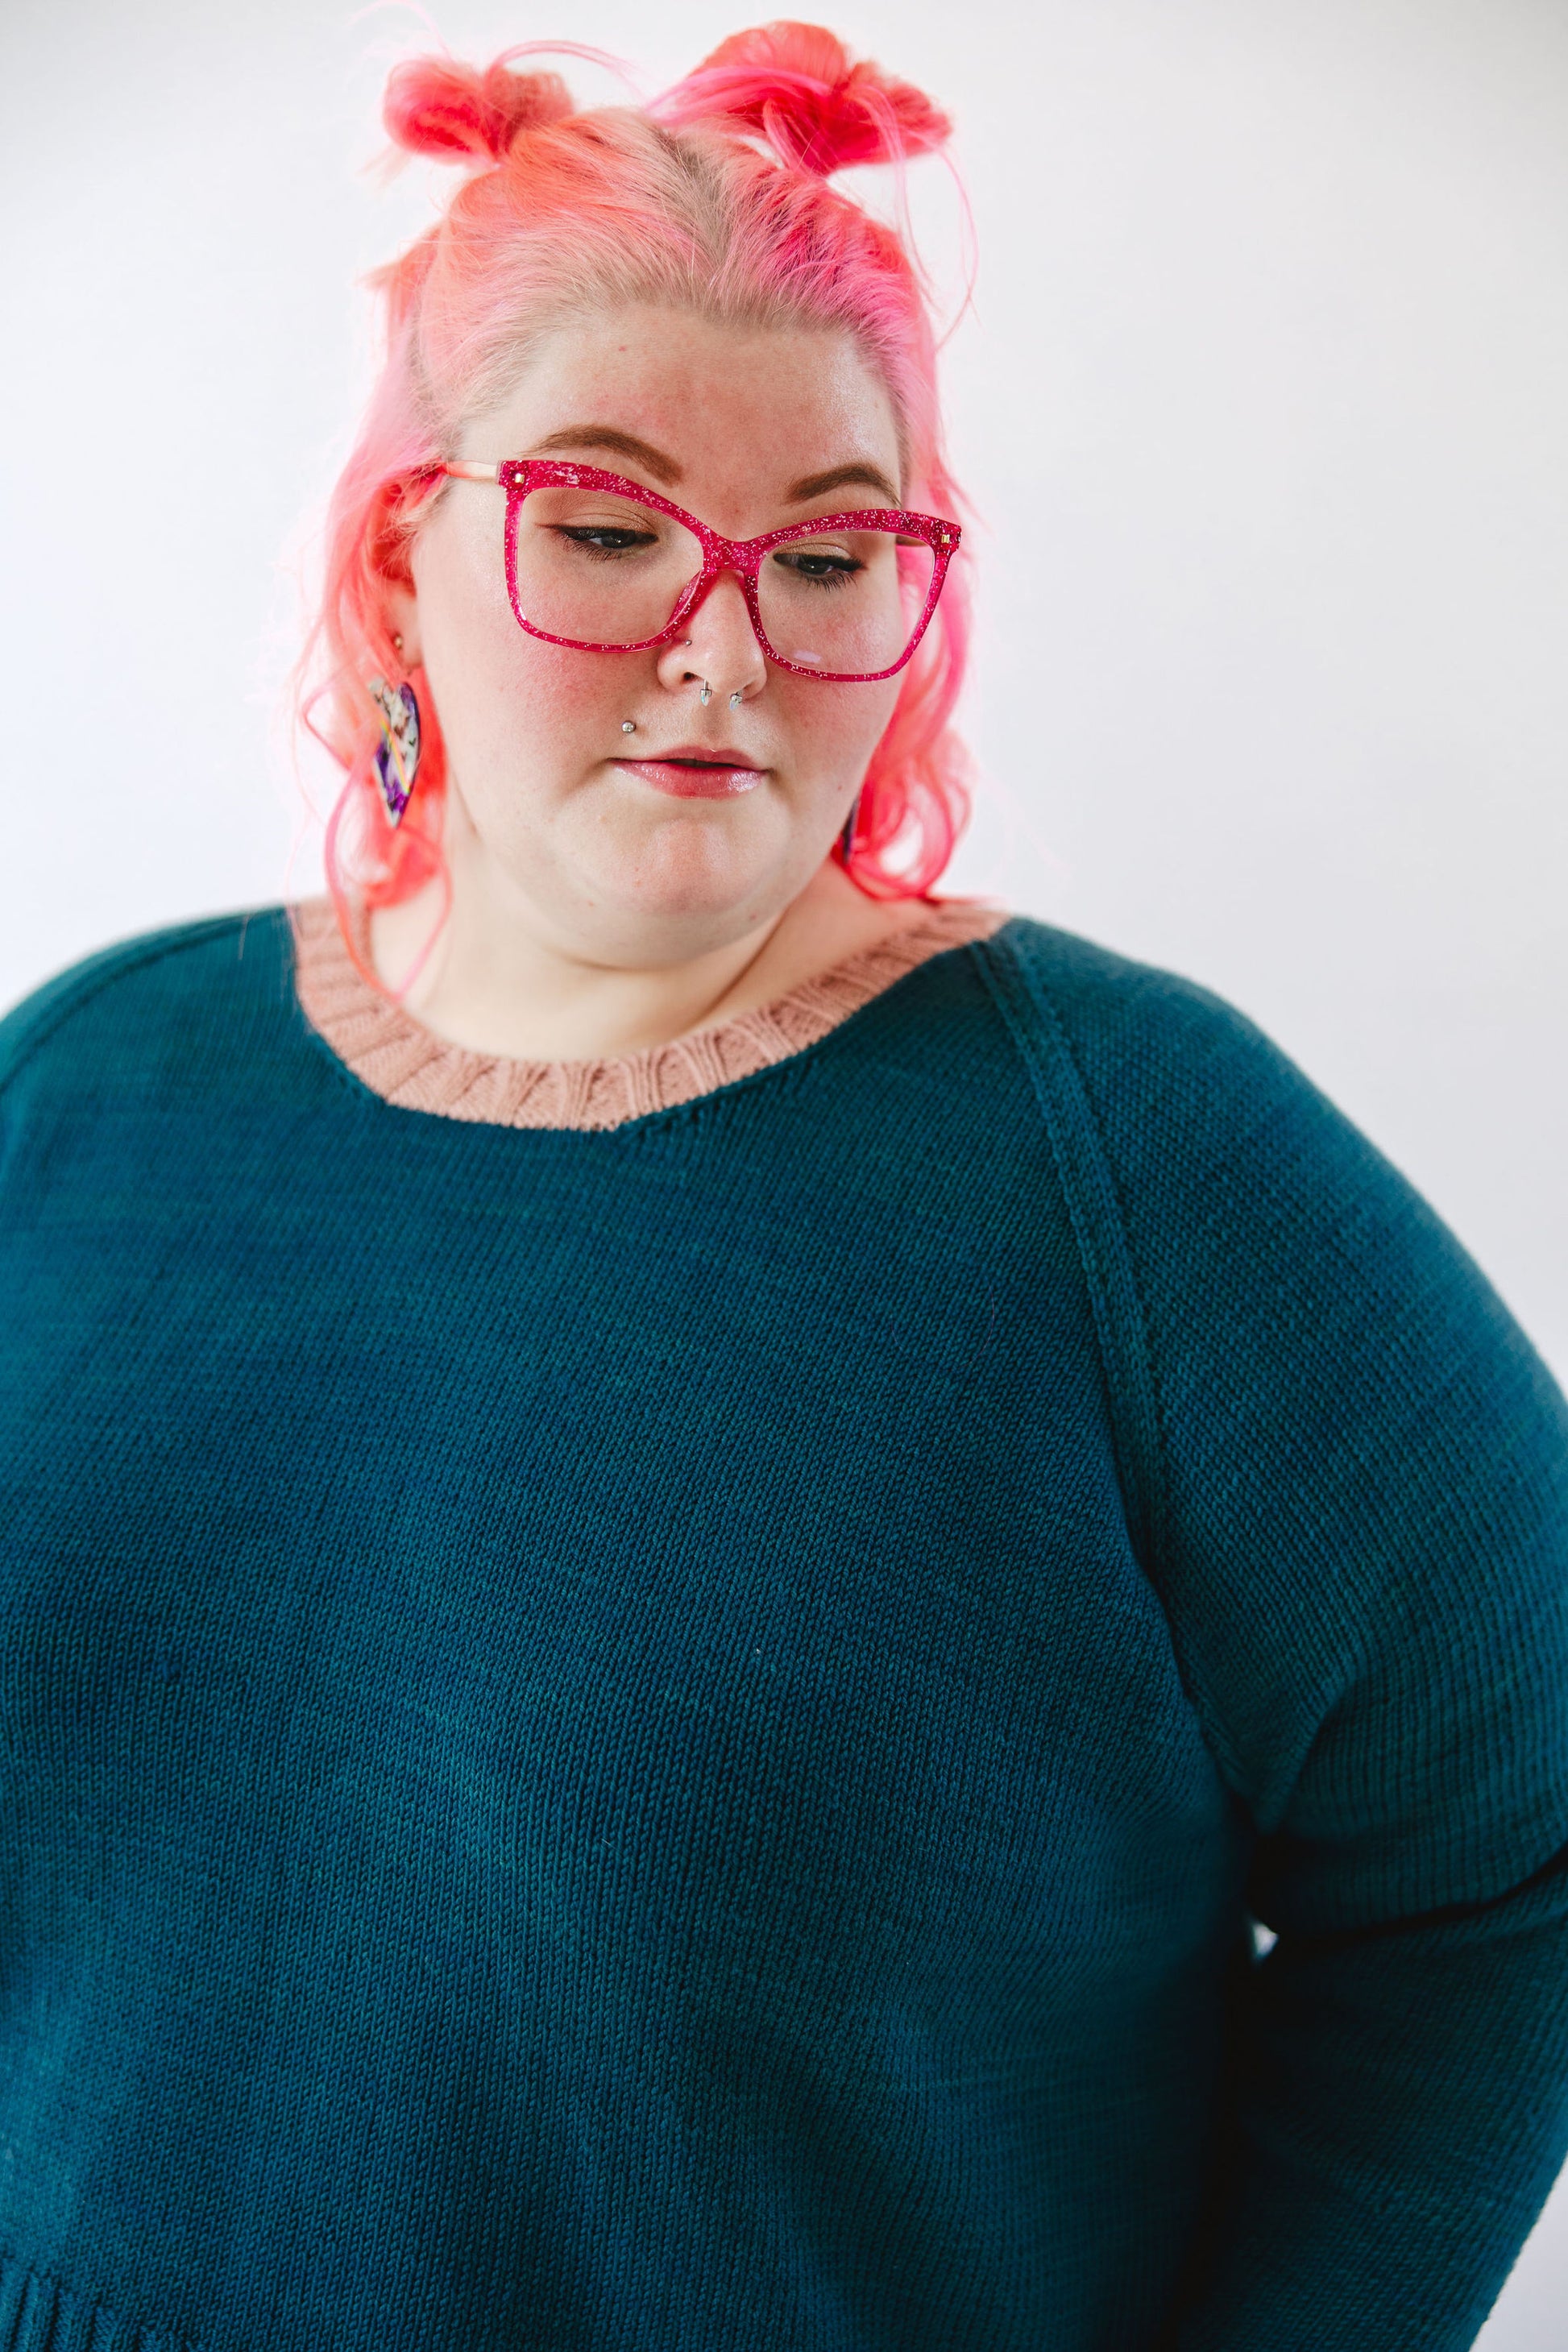 Seen close up, Courtney wears a teal hand knit sweater with an pink neckband. She looks off camera, her pink glasses matching her pink hair.